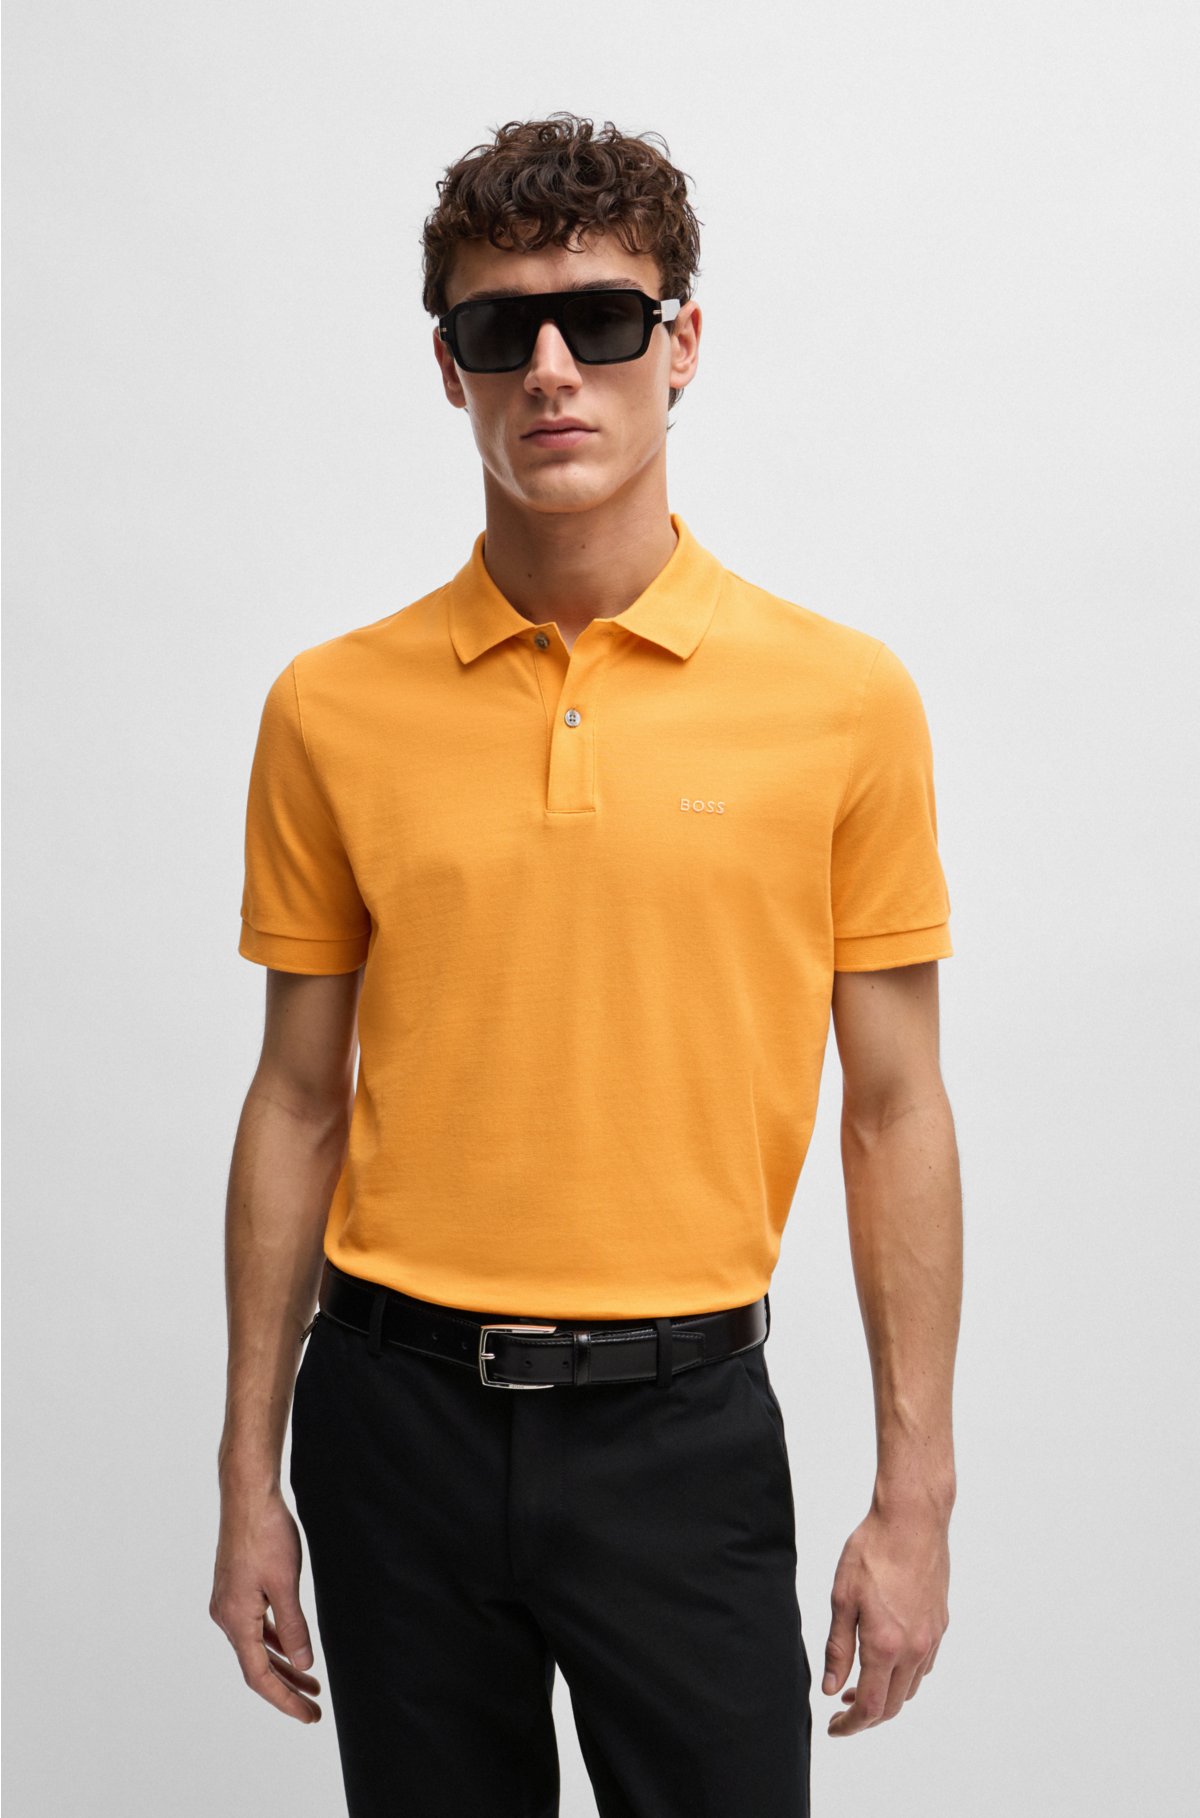 embroidered Cotton shirt polo logo - BOSS with